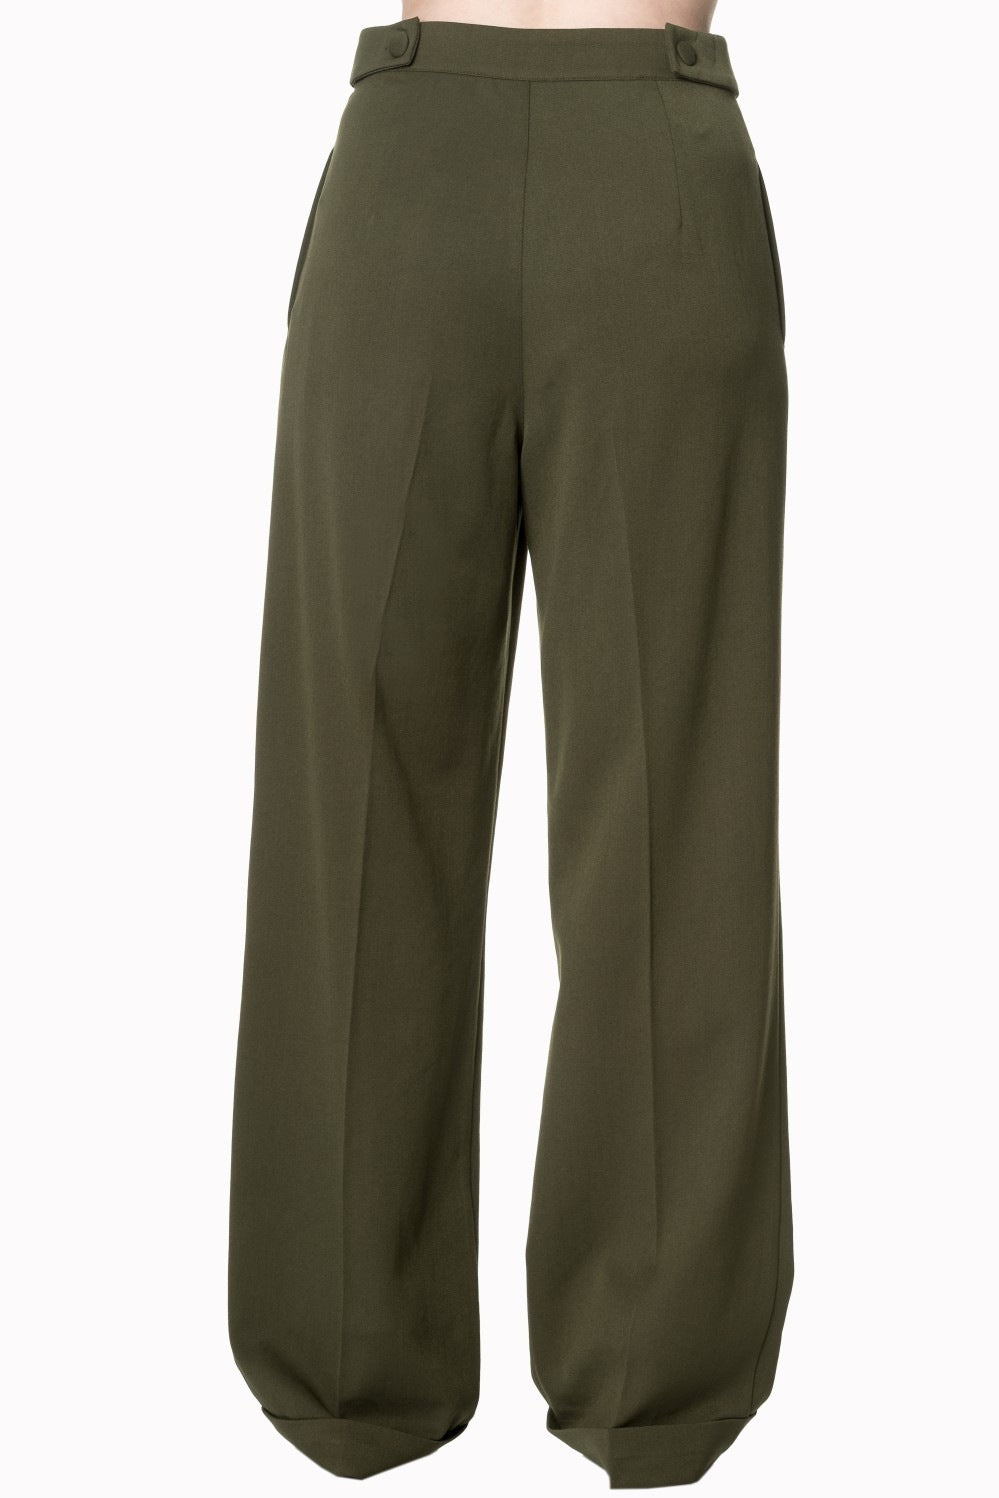 Party On Vintage Trousers olive